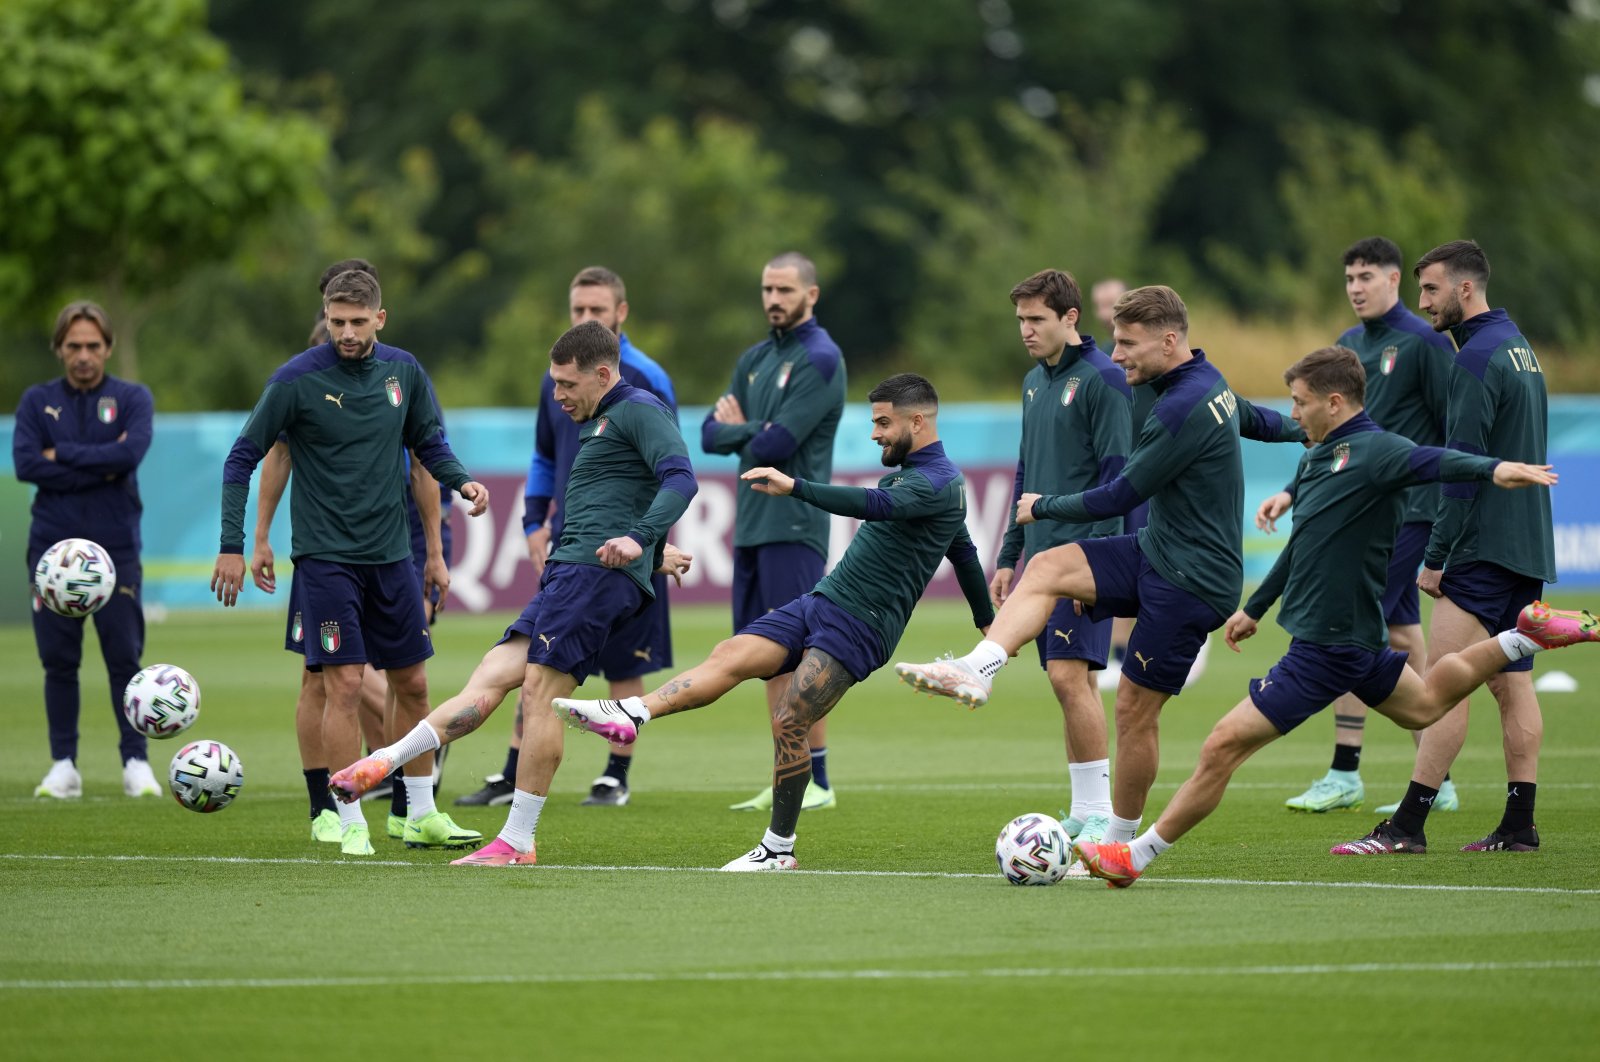 Italy players practice during a training session in London ahead of the Euro 2020 final against England, London, England, July 10, 2021. (AP Photo)